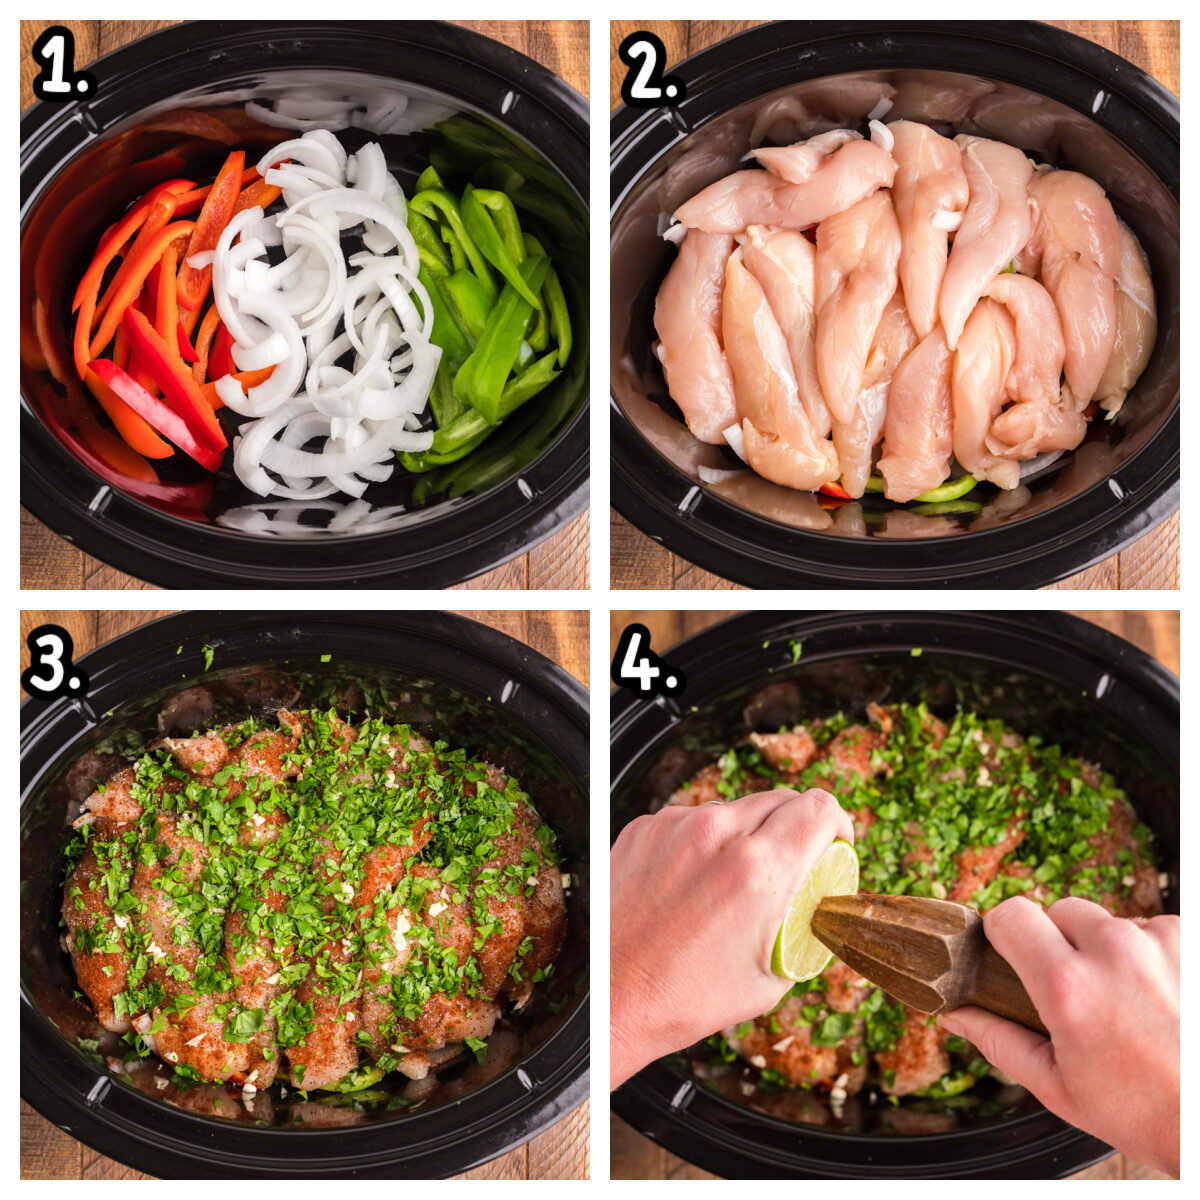 4 image collage on how to put ingredients in slow cooker for chicken fajitas